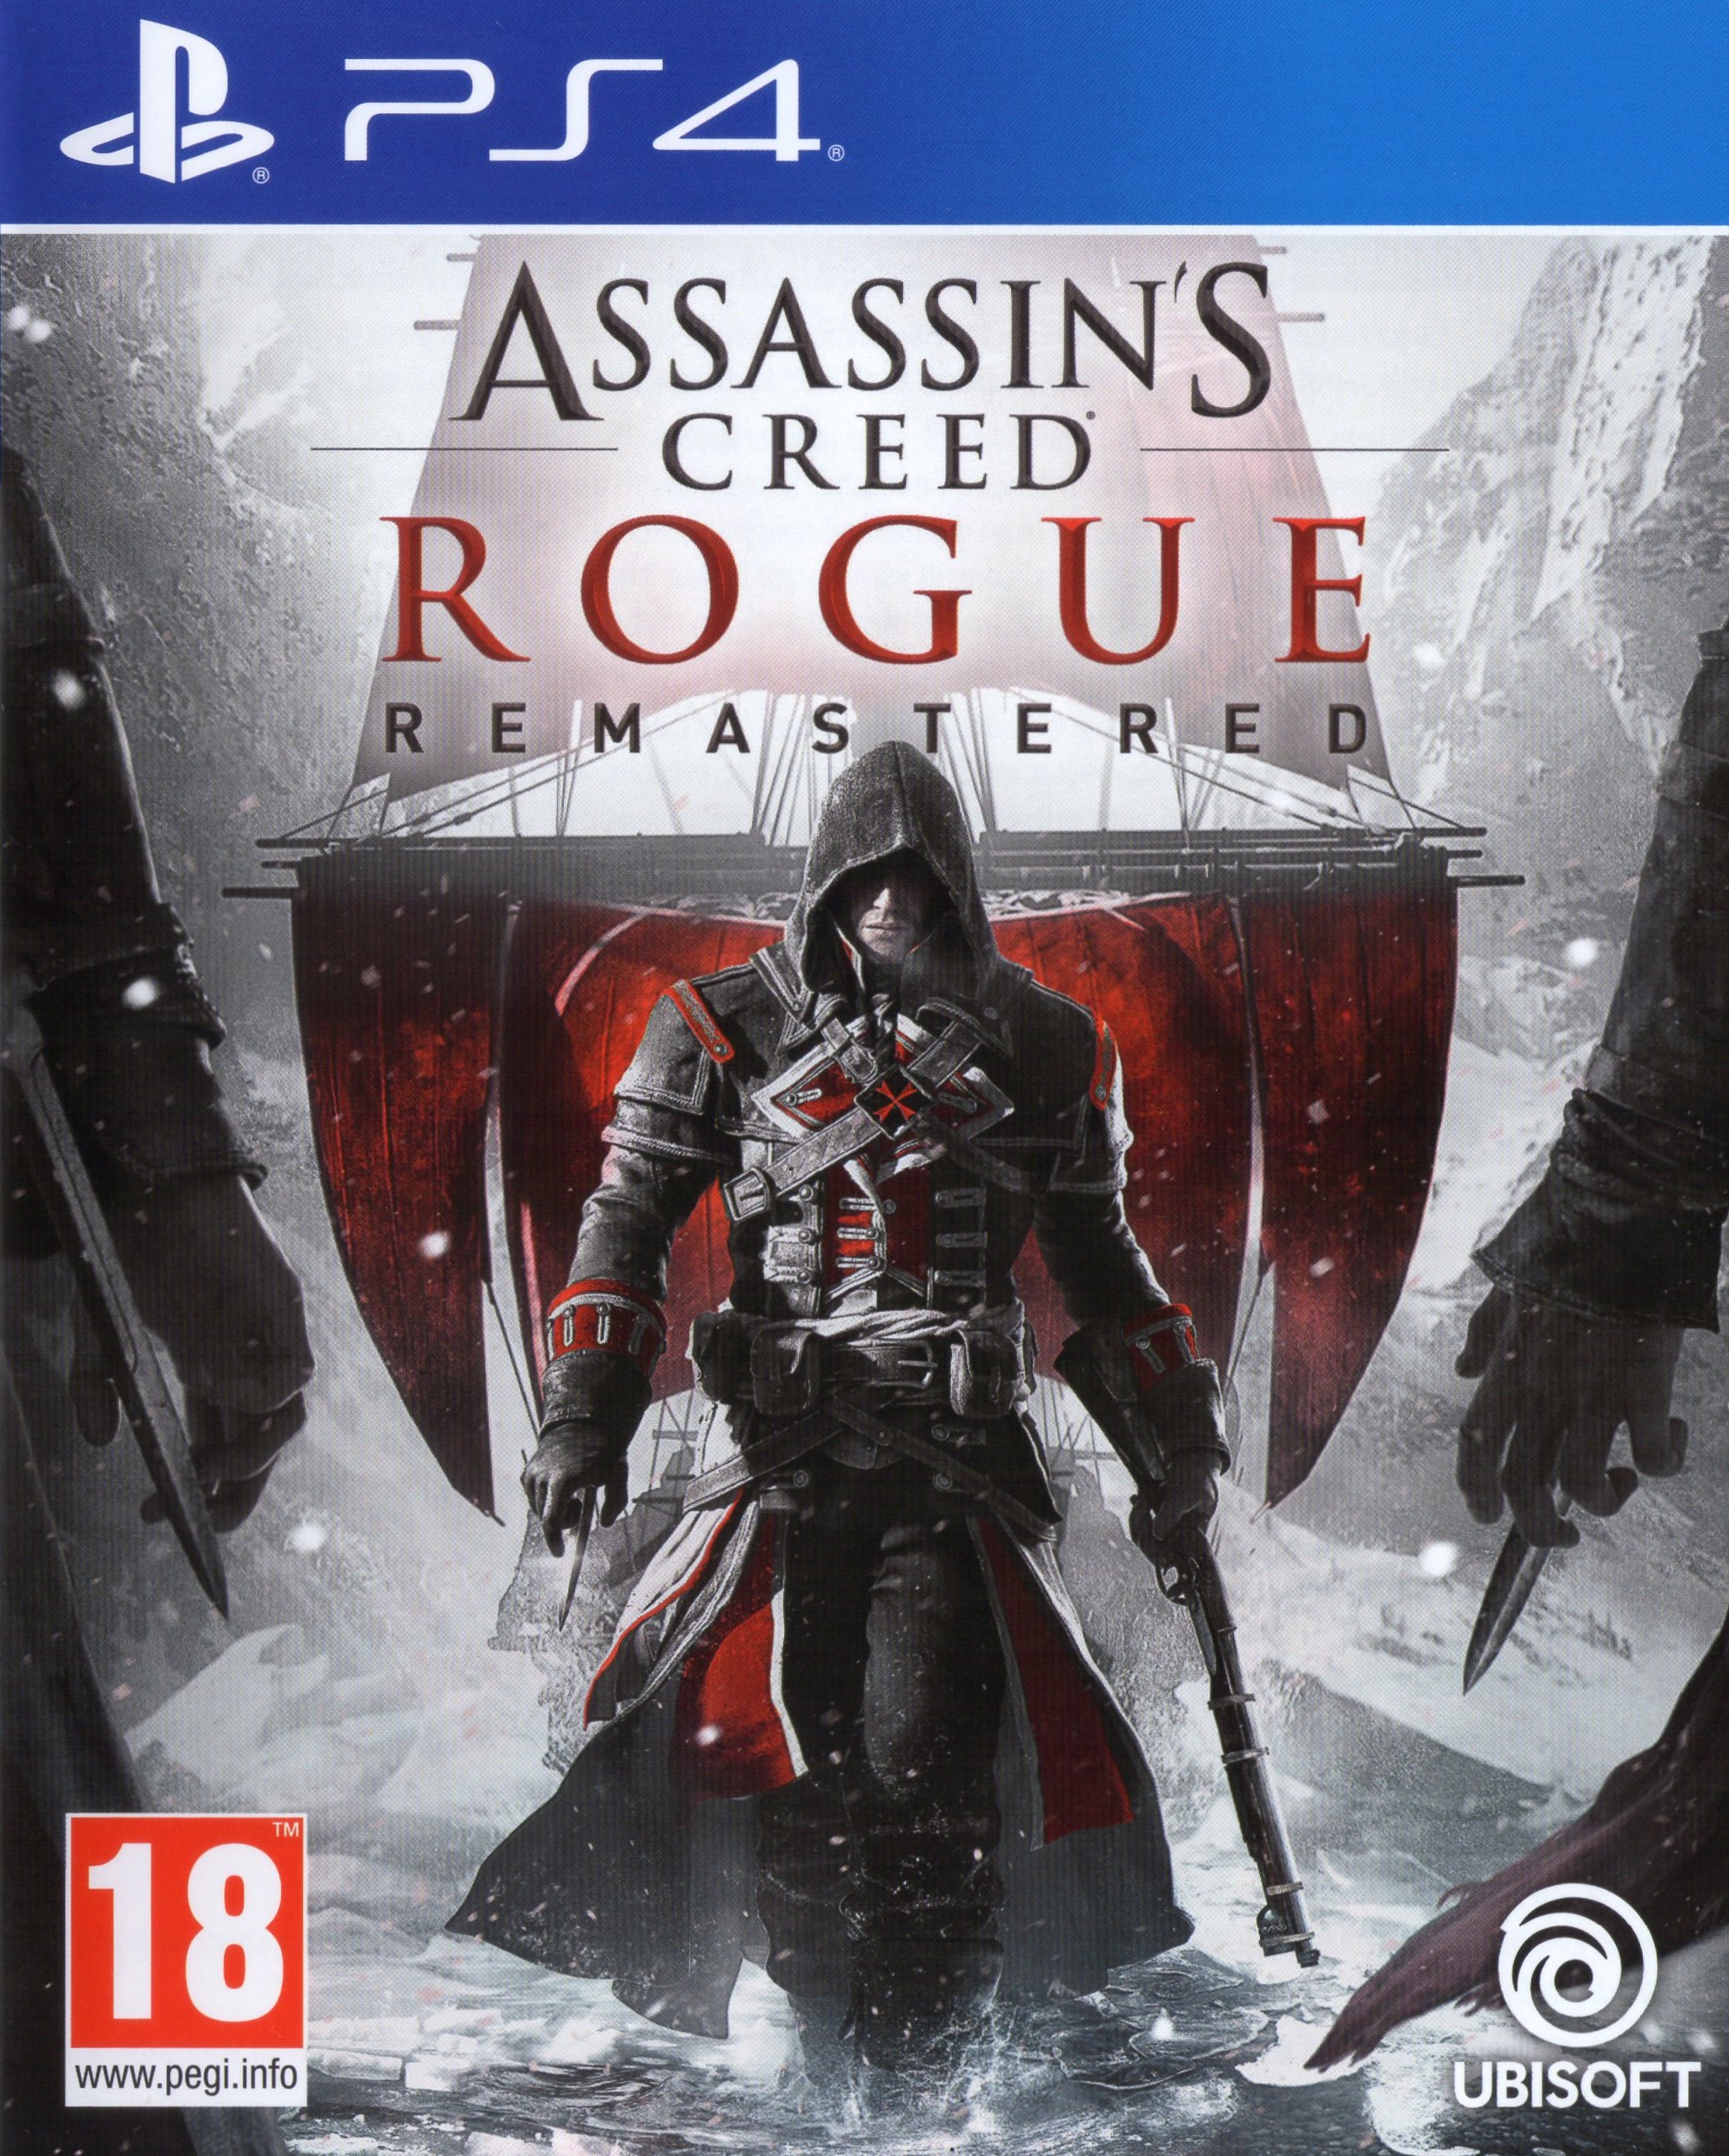 'Assassin's Creed: Rogue - Remastered'